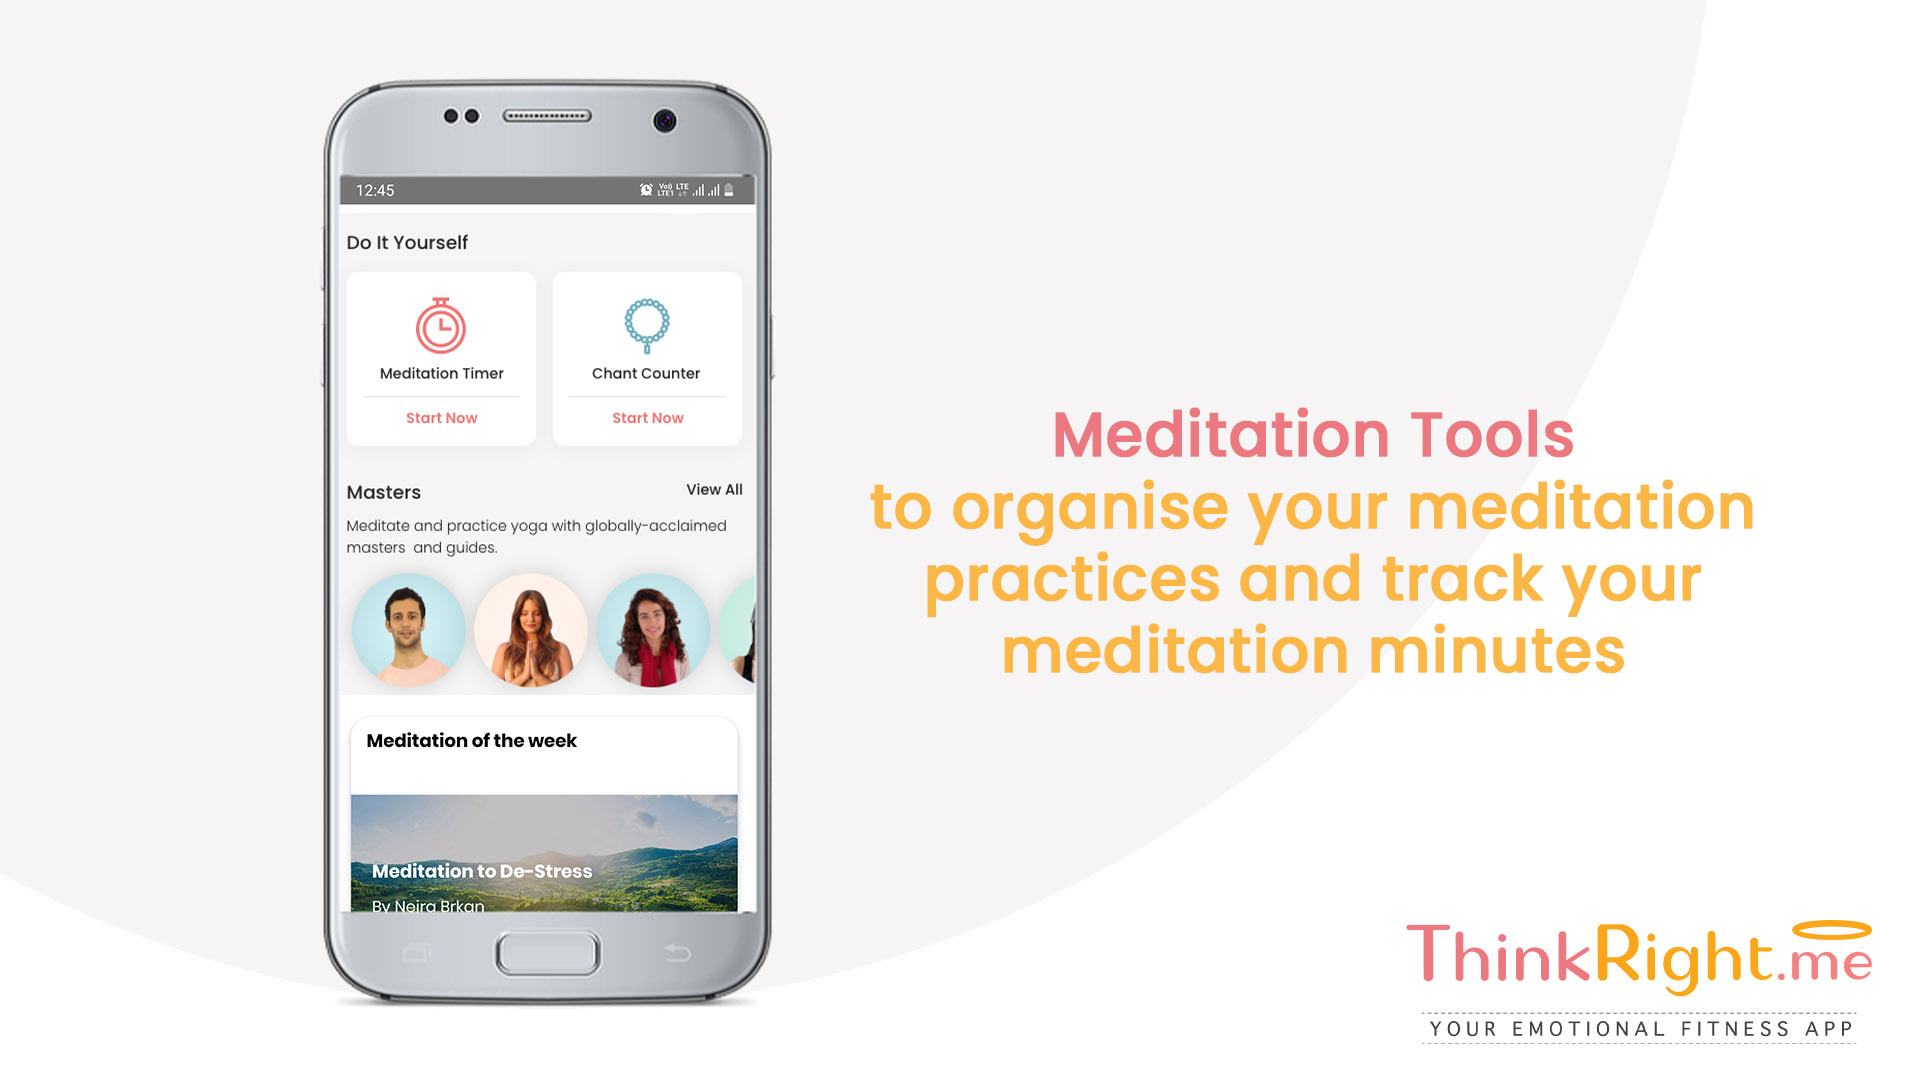 ThinkRight.me: Meditate Daily